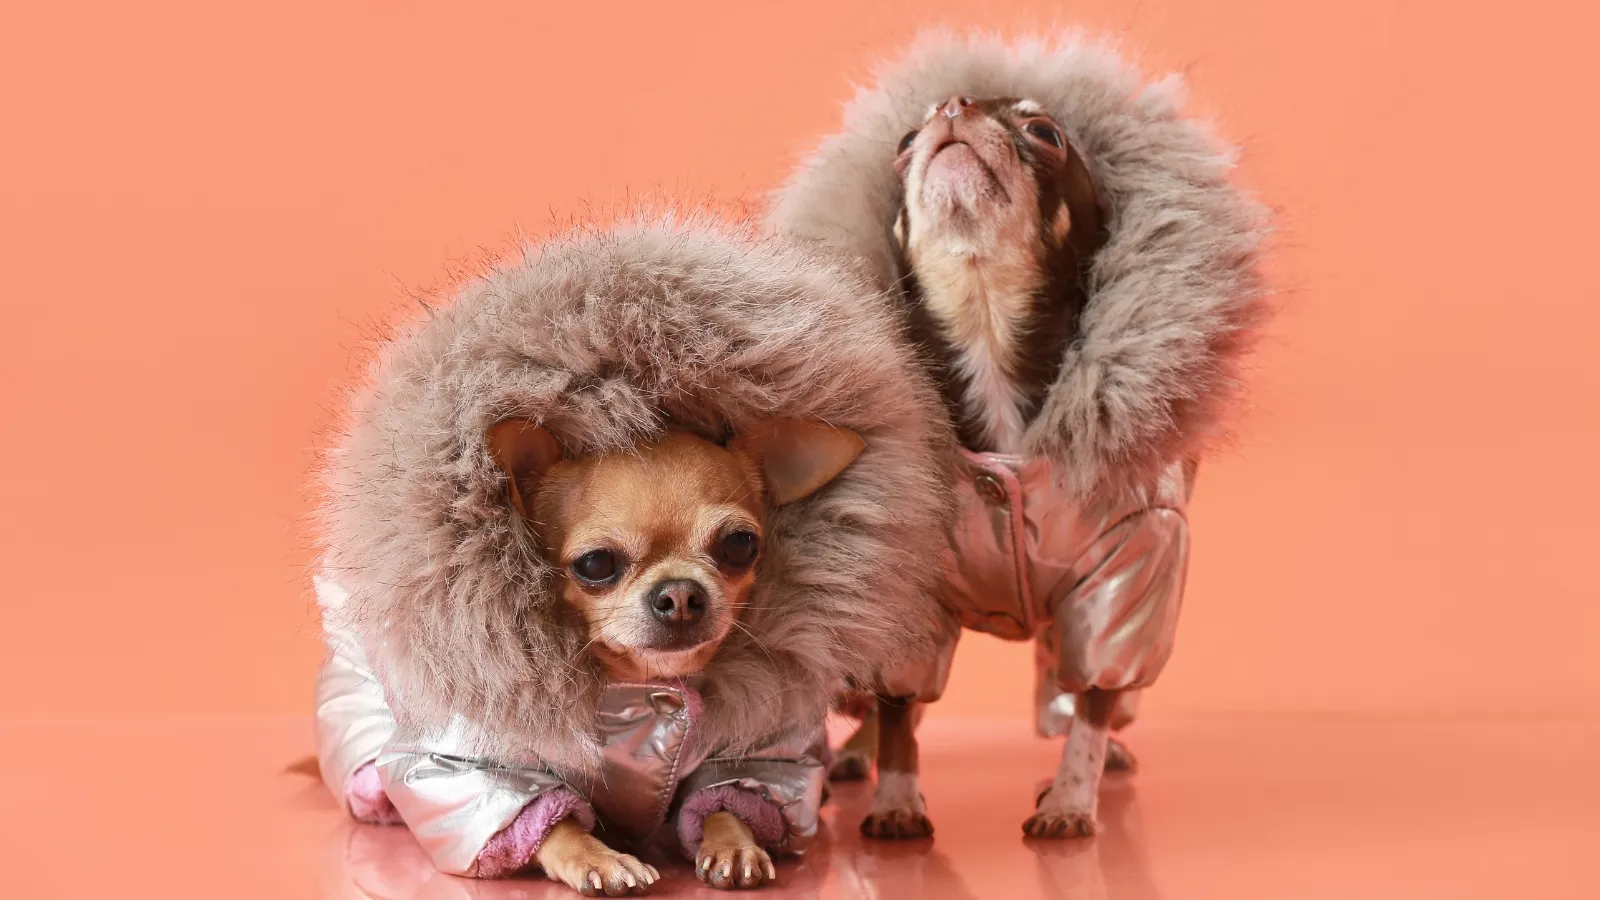 Considerations for Dog Comfort and Safety in Fall Fashion